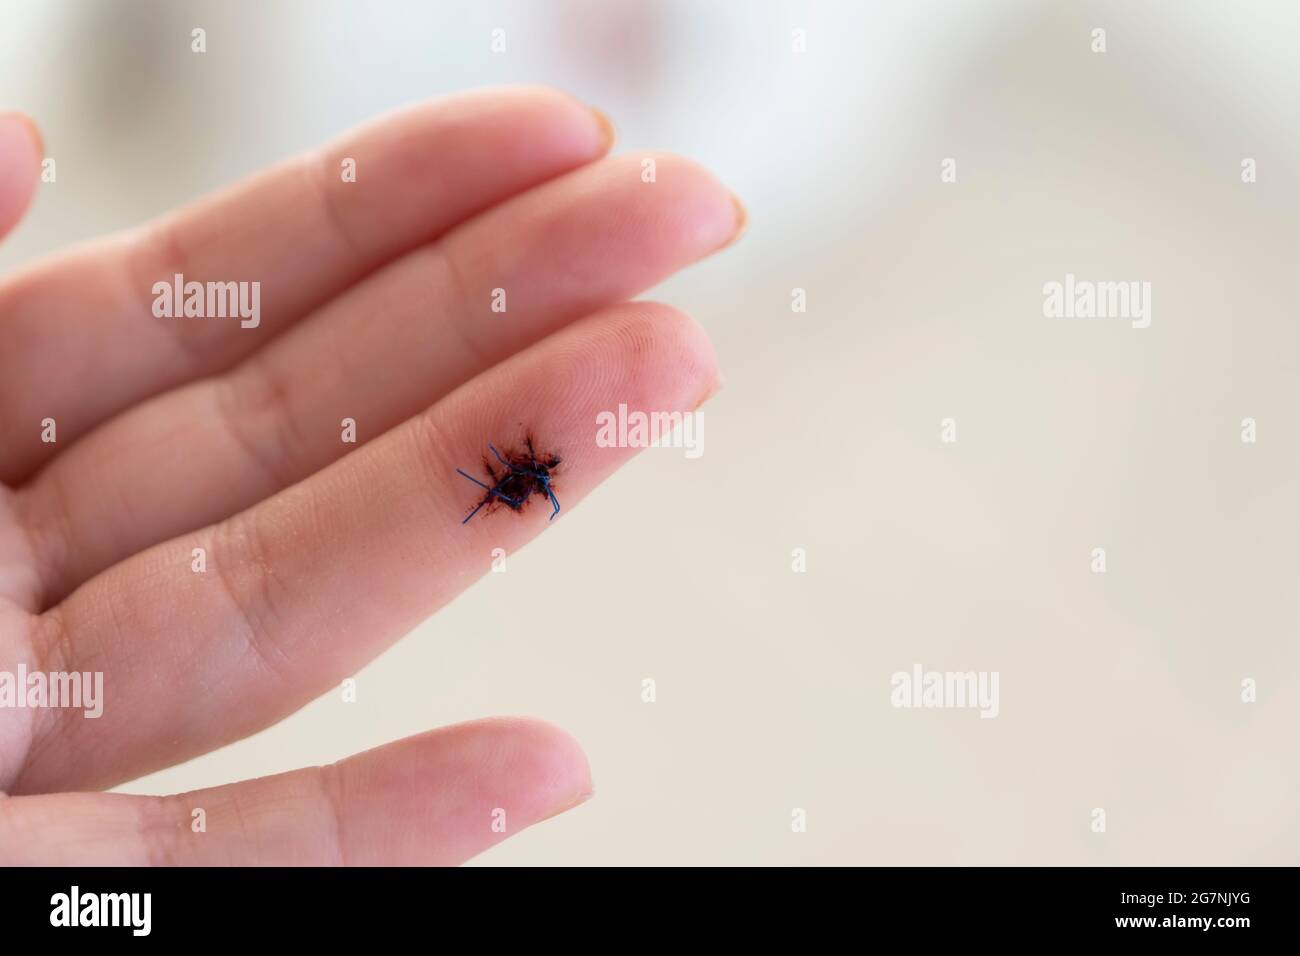 A wound on a woman's finger was treated with surgical sutures. Stock Photo